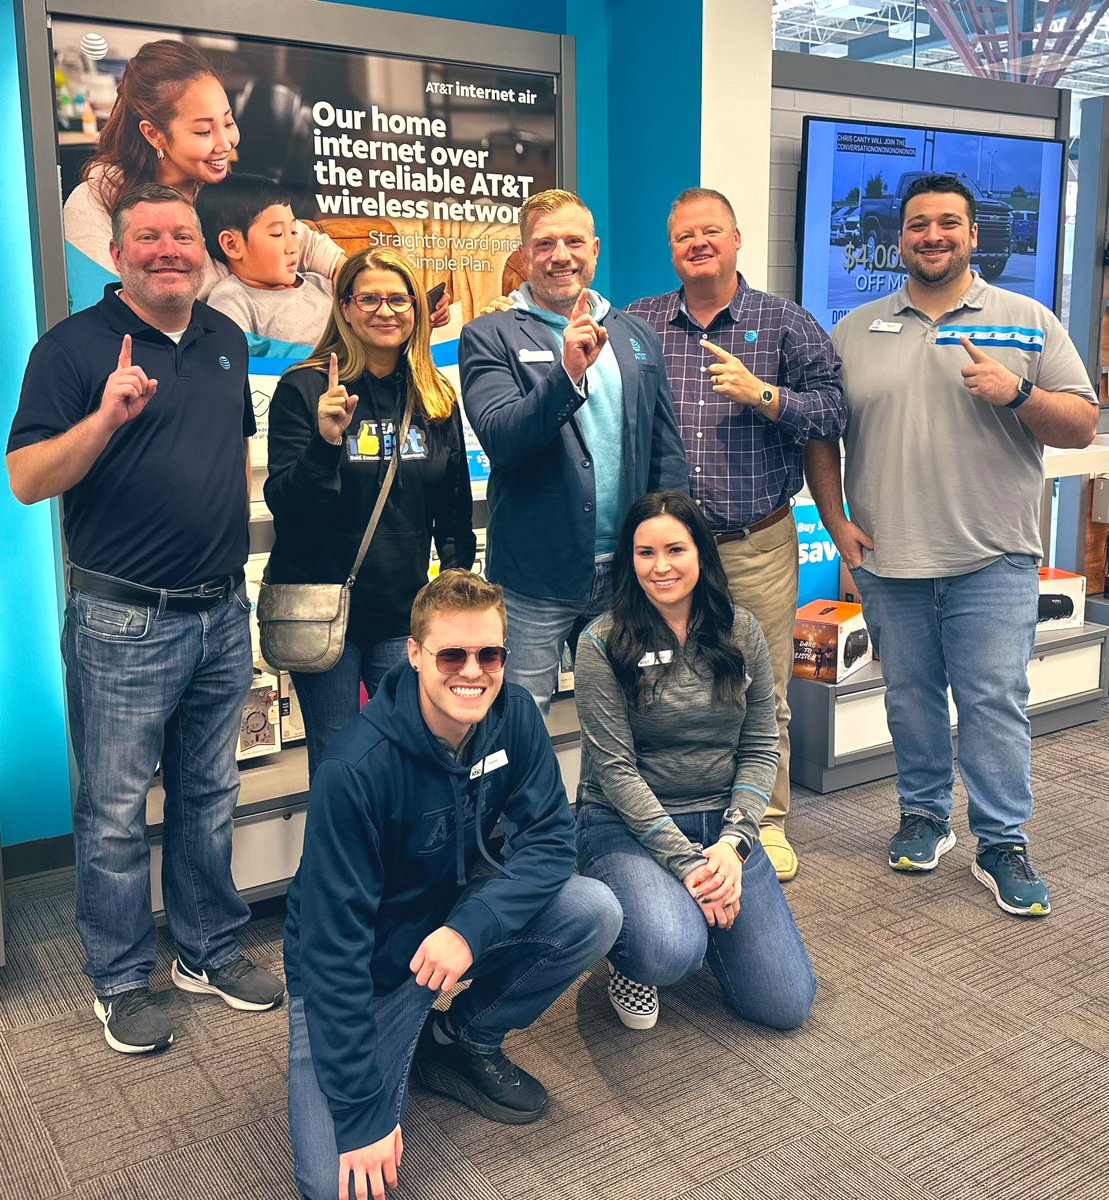 It was a pleasure hosting our VPGM @keroninc as well as our DOS @BIGBizDecker & ARSM @gilbyfc at the Beaver Valley Mall AT&T store today. Big things coming from BVM in Q4 🦫 📈 #teamrise #teambest #OHPA #lifeatatt @john_rosati22 @att_morgan @ATTom_E